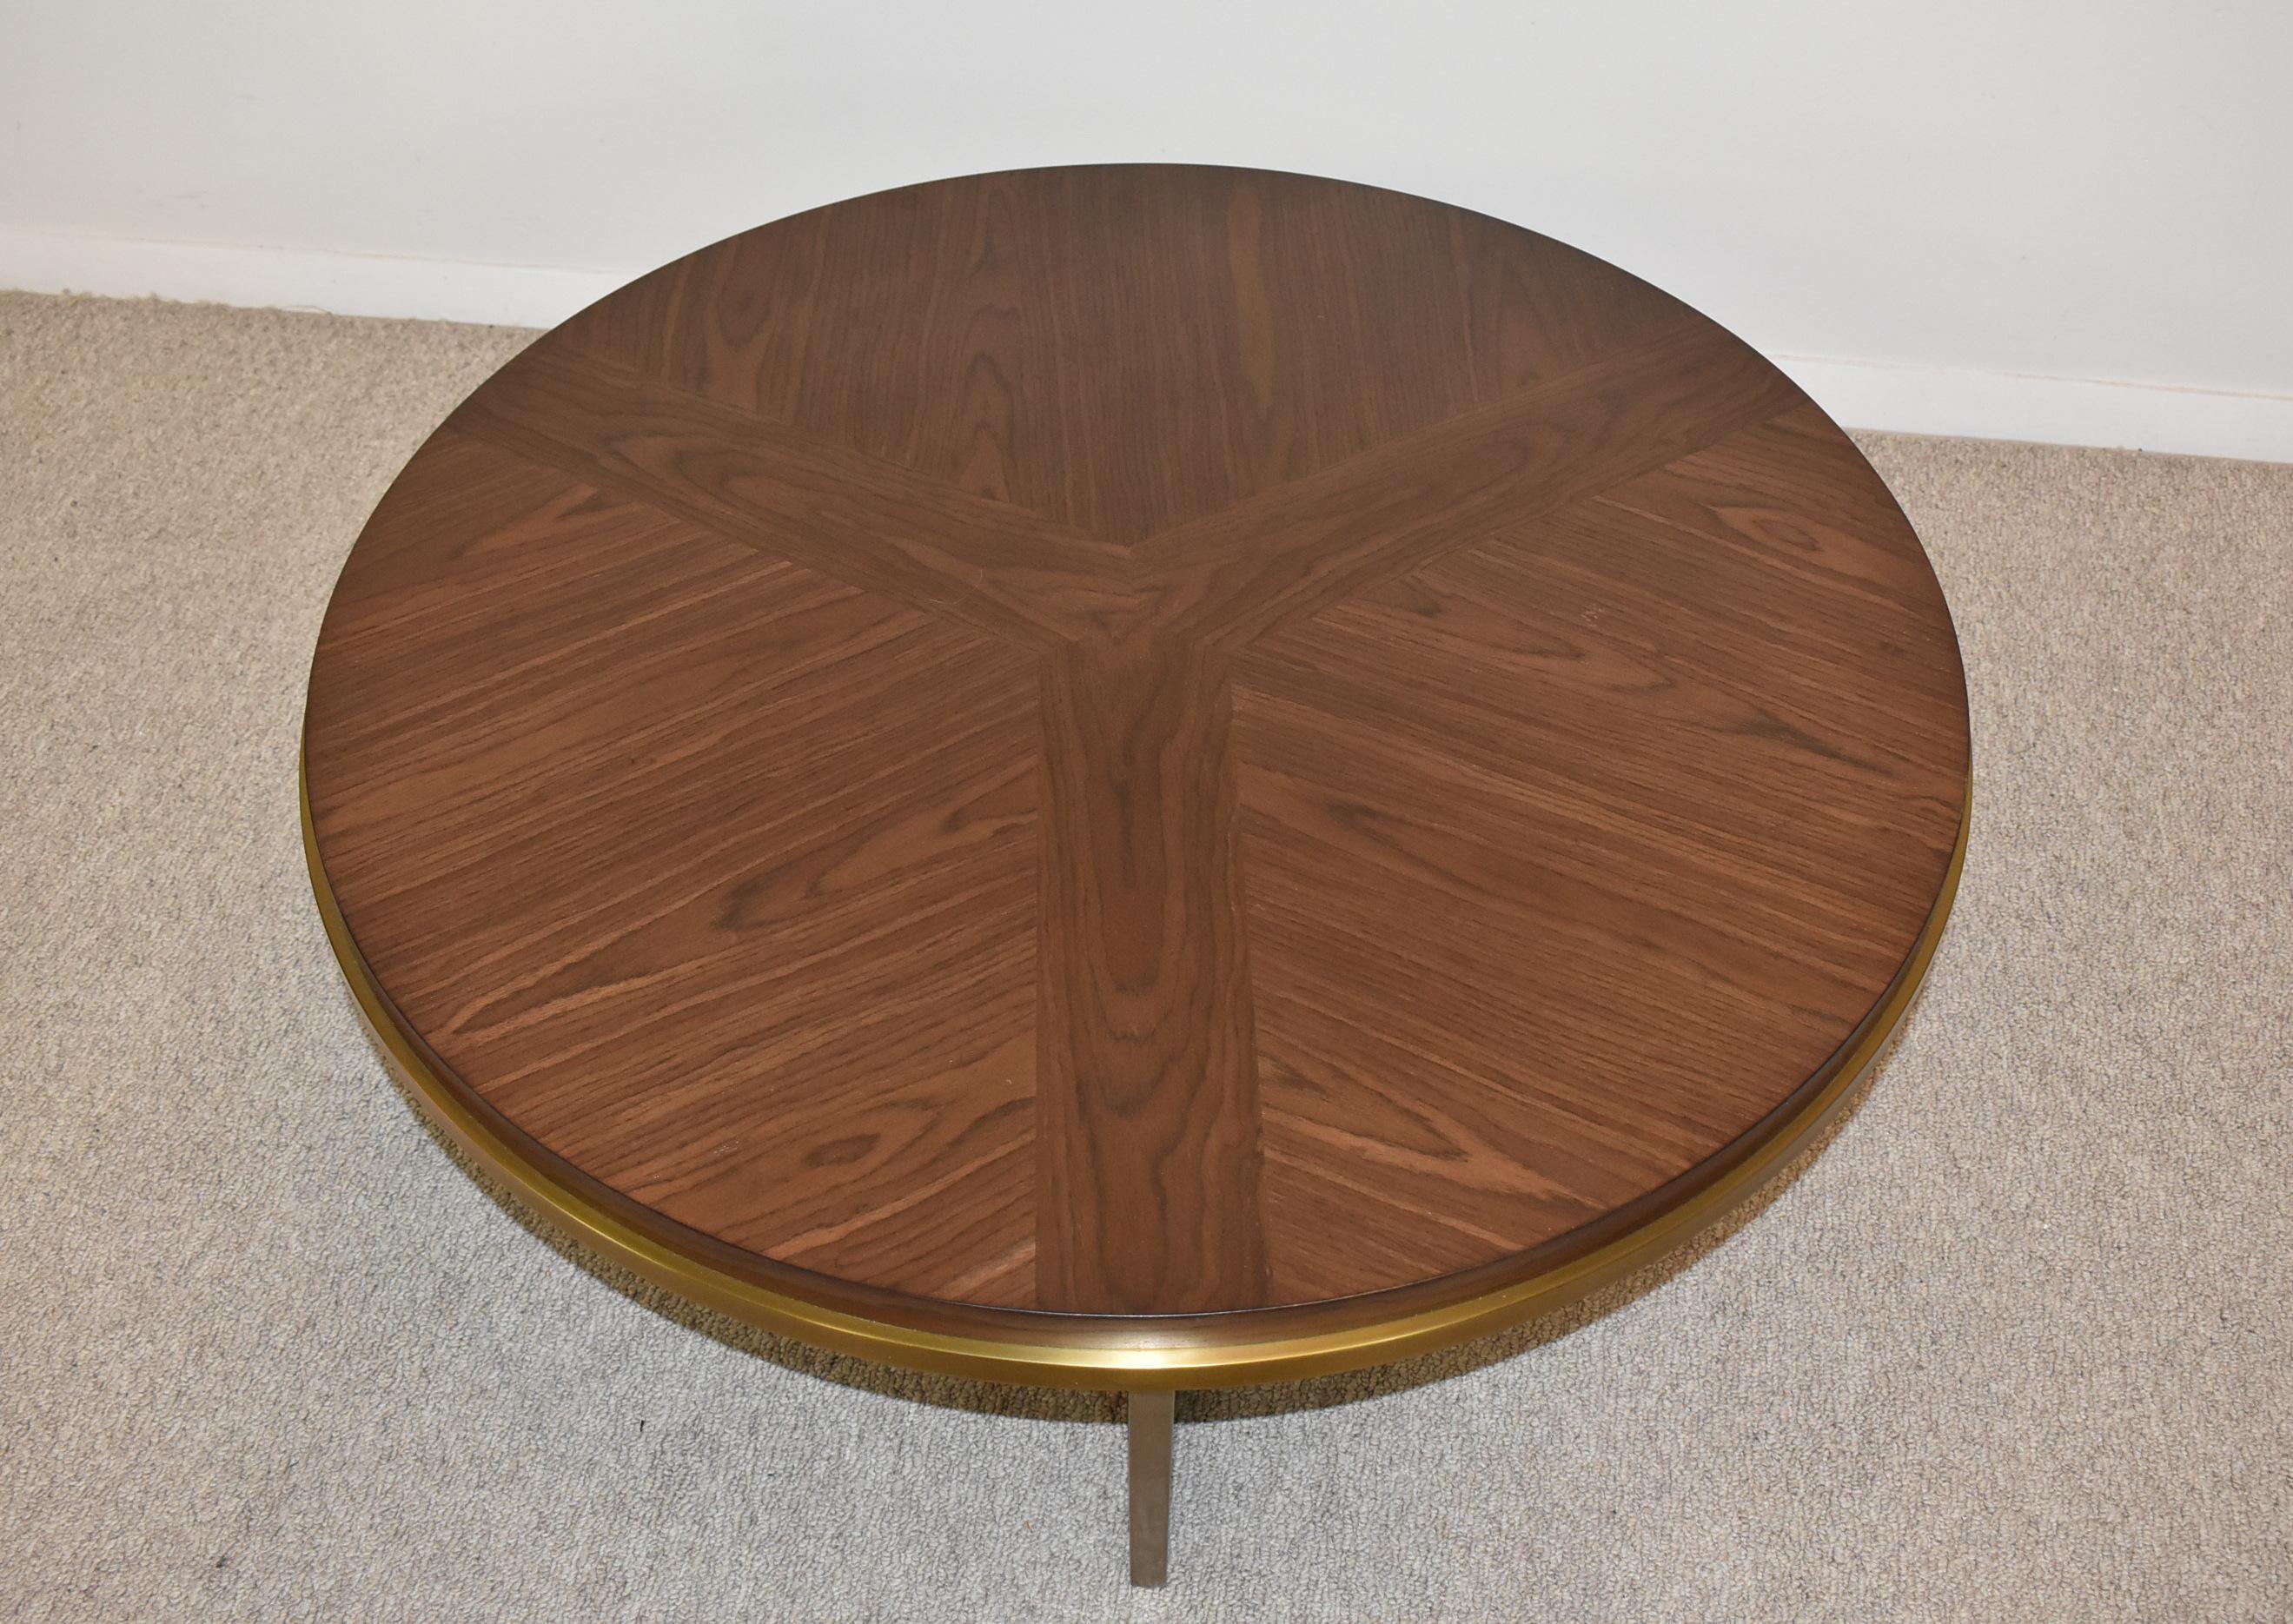 Theodore Alexander inlay walnut and satin brass modern coffee table. Top is 1